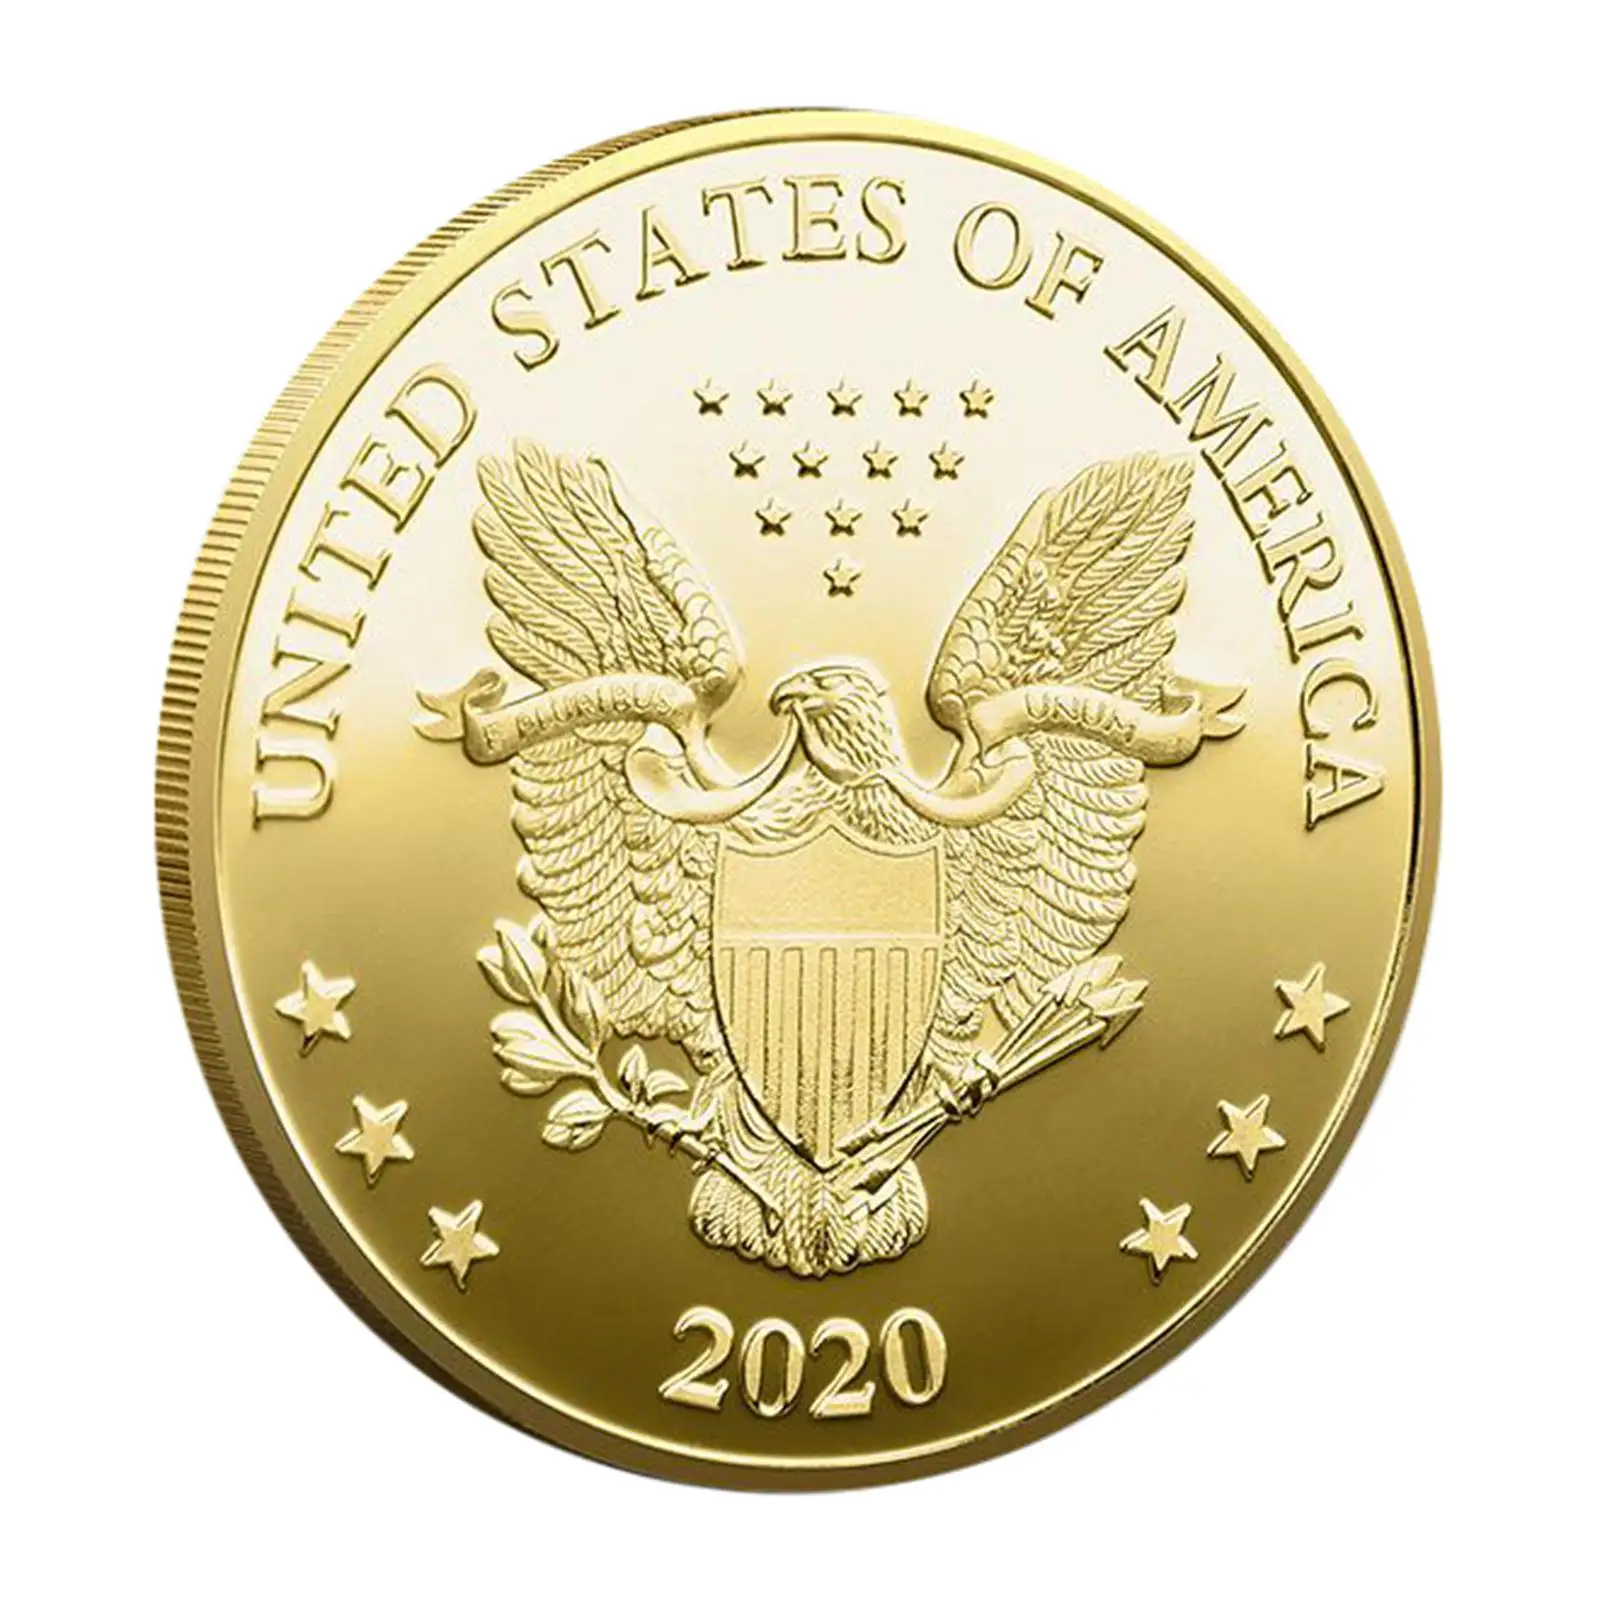 Gold Plated President of the United States Joe Biden Coin  Coin Inauguration Collectibles Collection